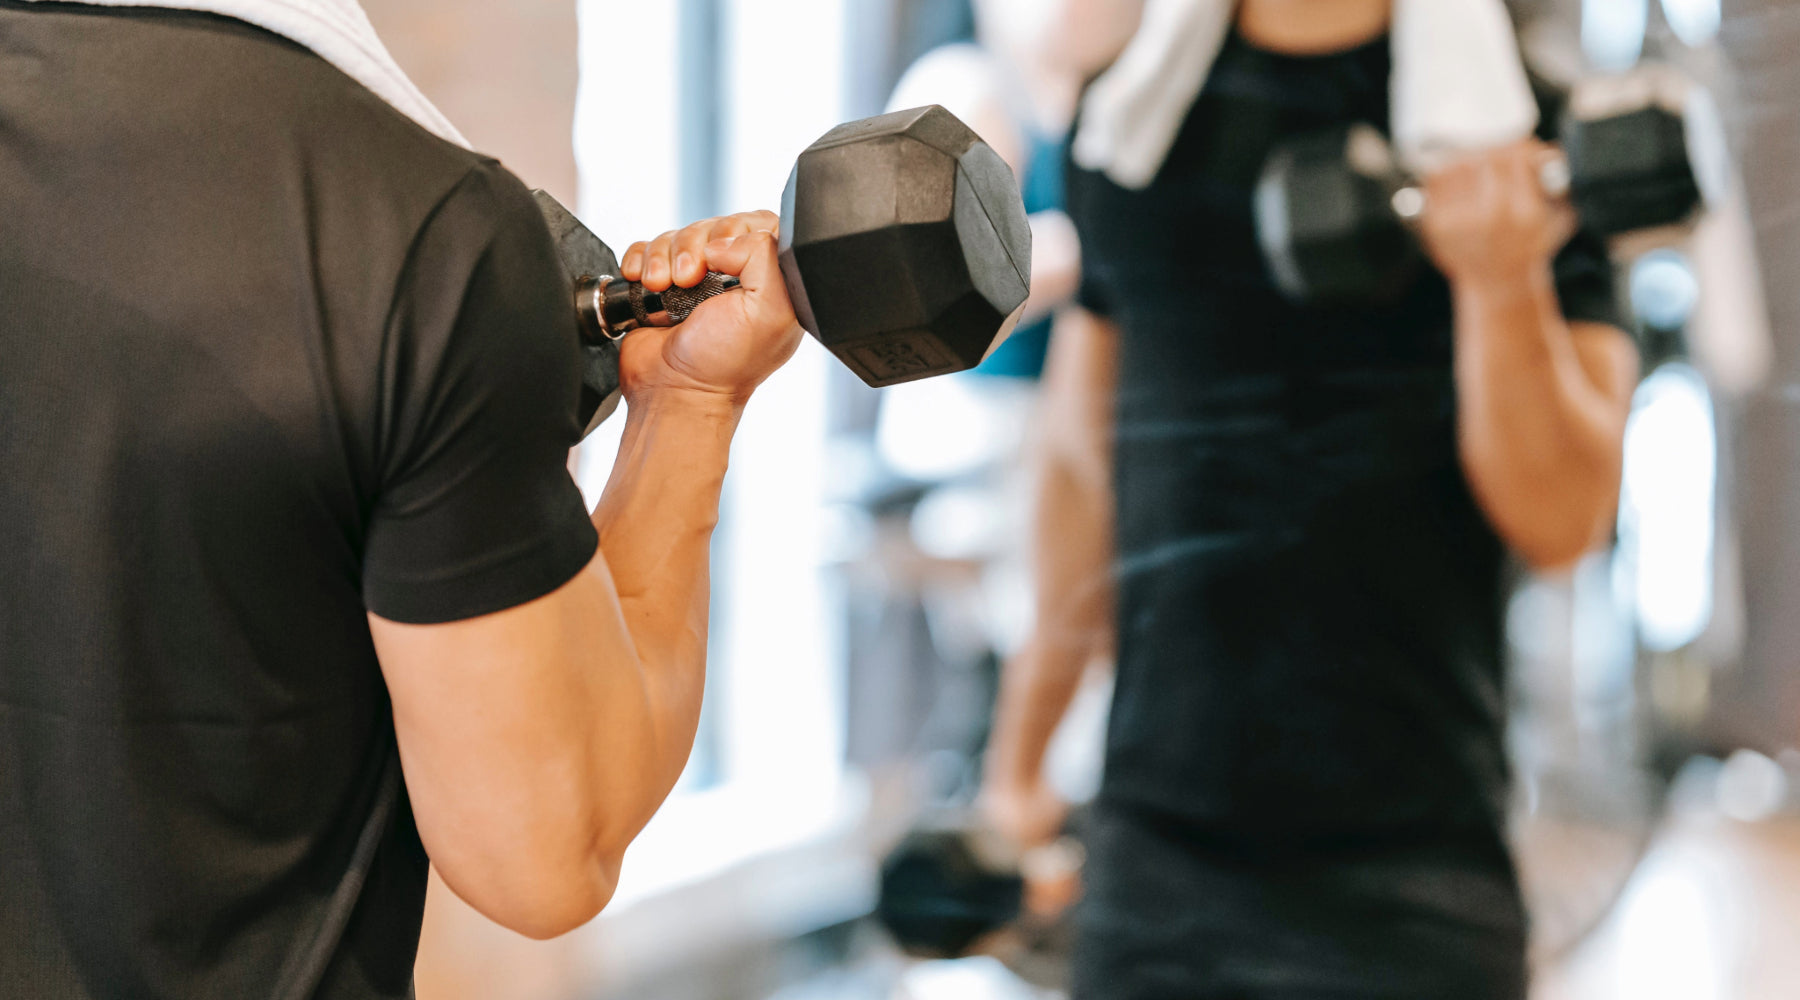 Workout Warriors: Essential Post-Gym Grooming Tips with Nateskin